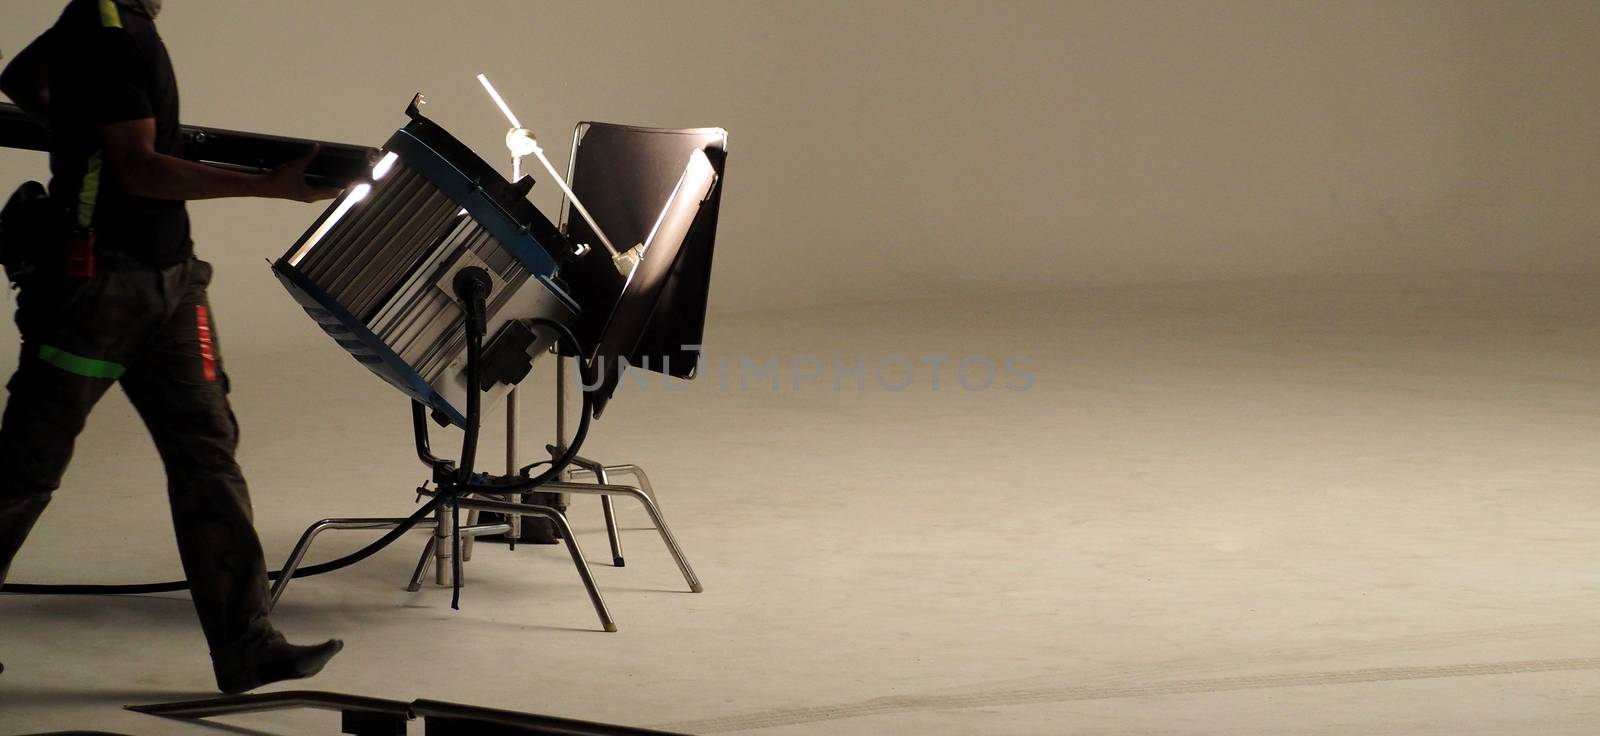 Big studio lights for video movie or film production by gnepphoto